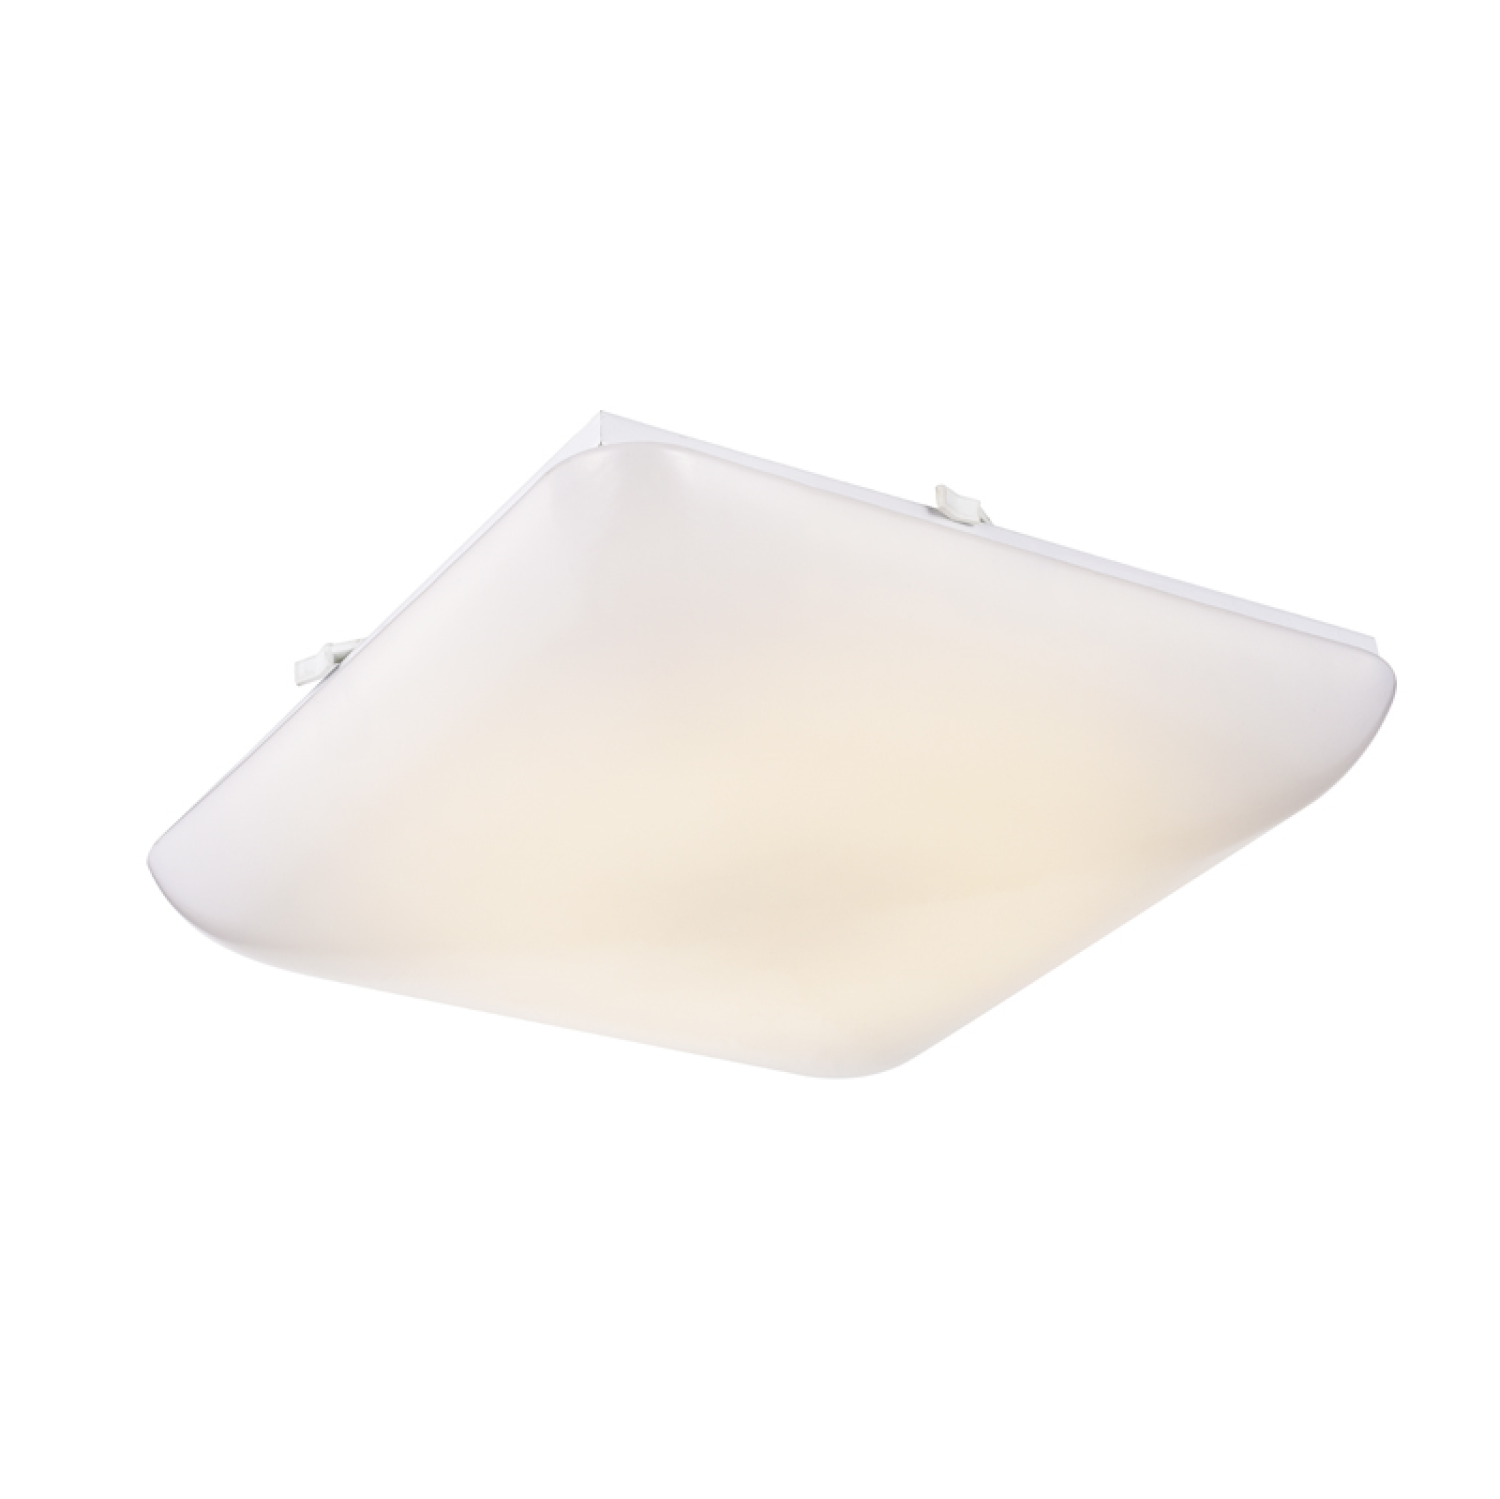 11 Inch Square LED Puff Ceiling Light, Cloud, White, Surface Mount, 120V, 1500 Lumens